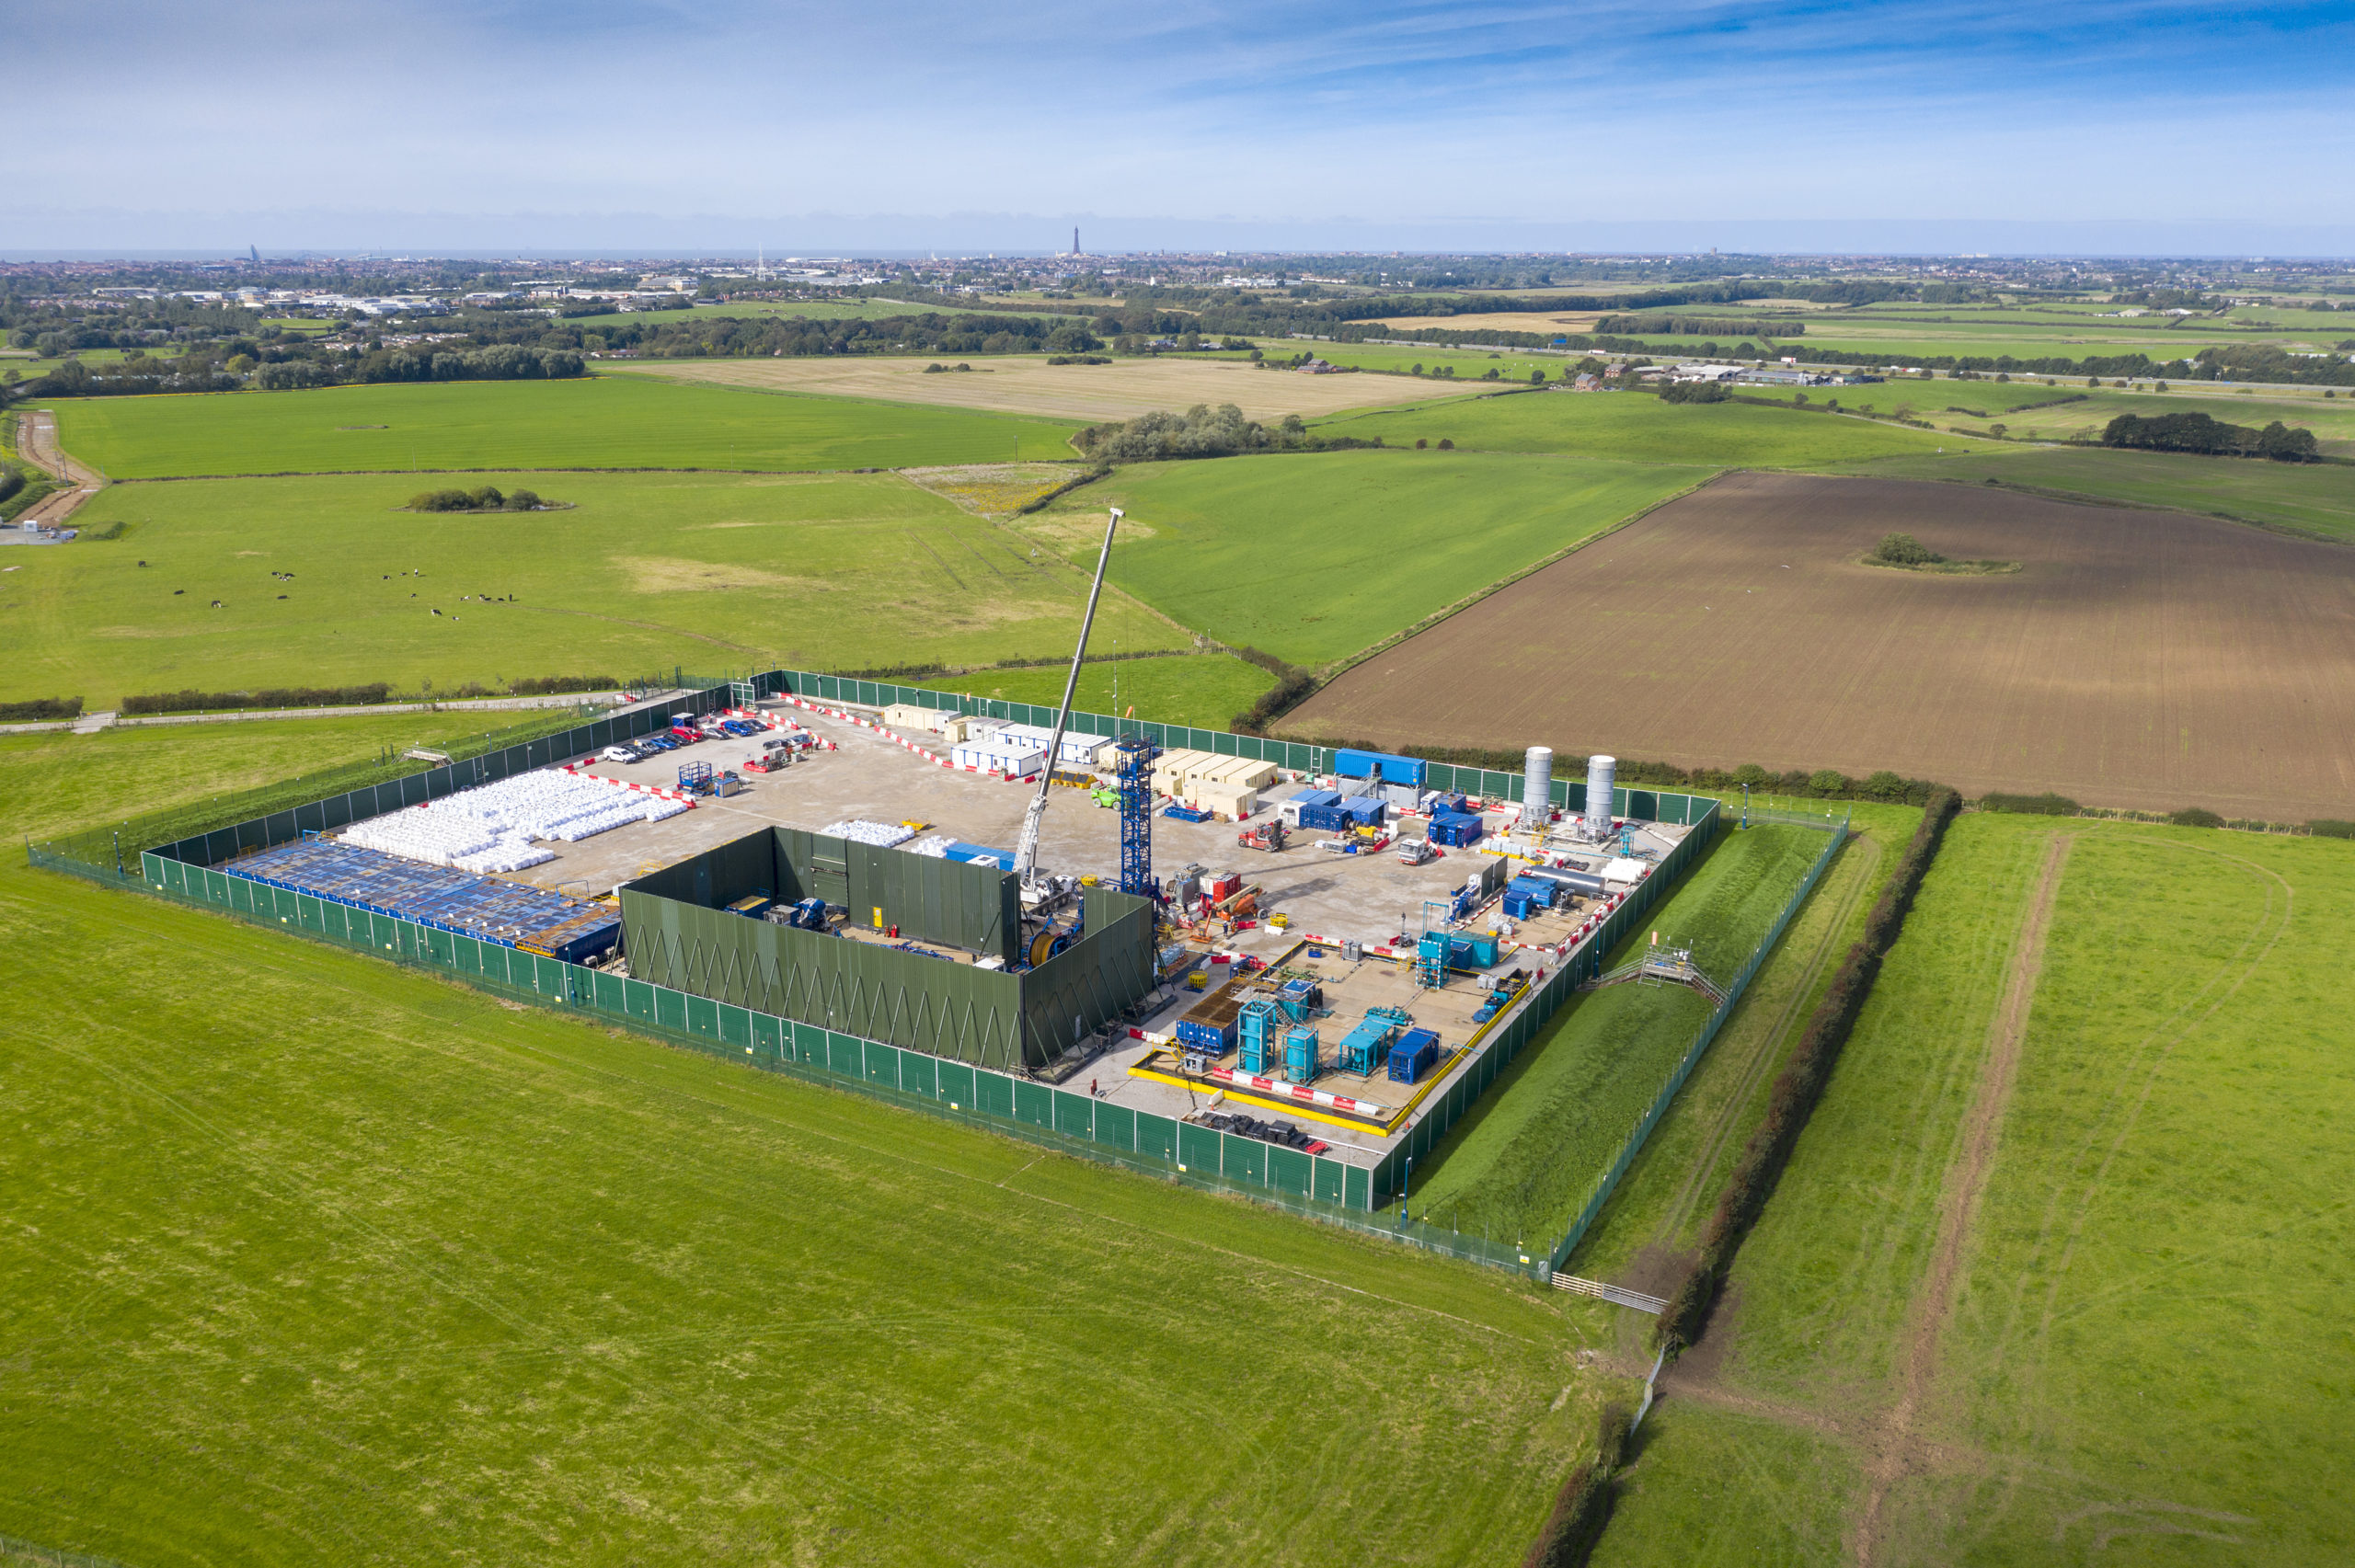 An aerial view of the Cuadrilla shale gas extraction and fracking site on Sept. 16, 2019 in Preston, England. (Christopher Furlong/Getty Images)